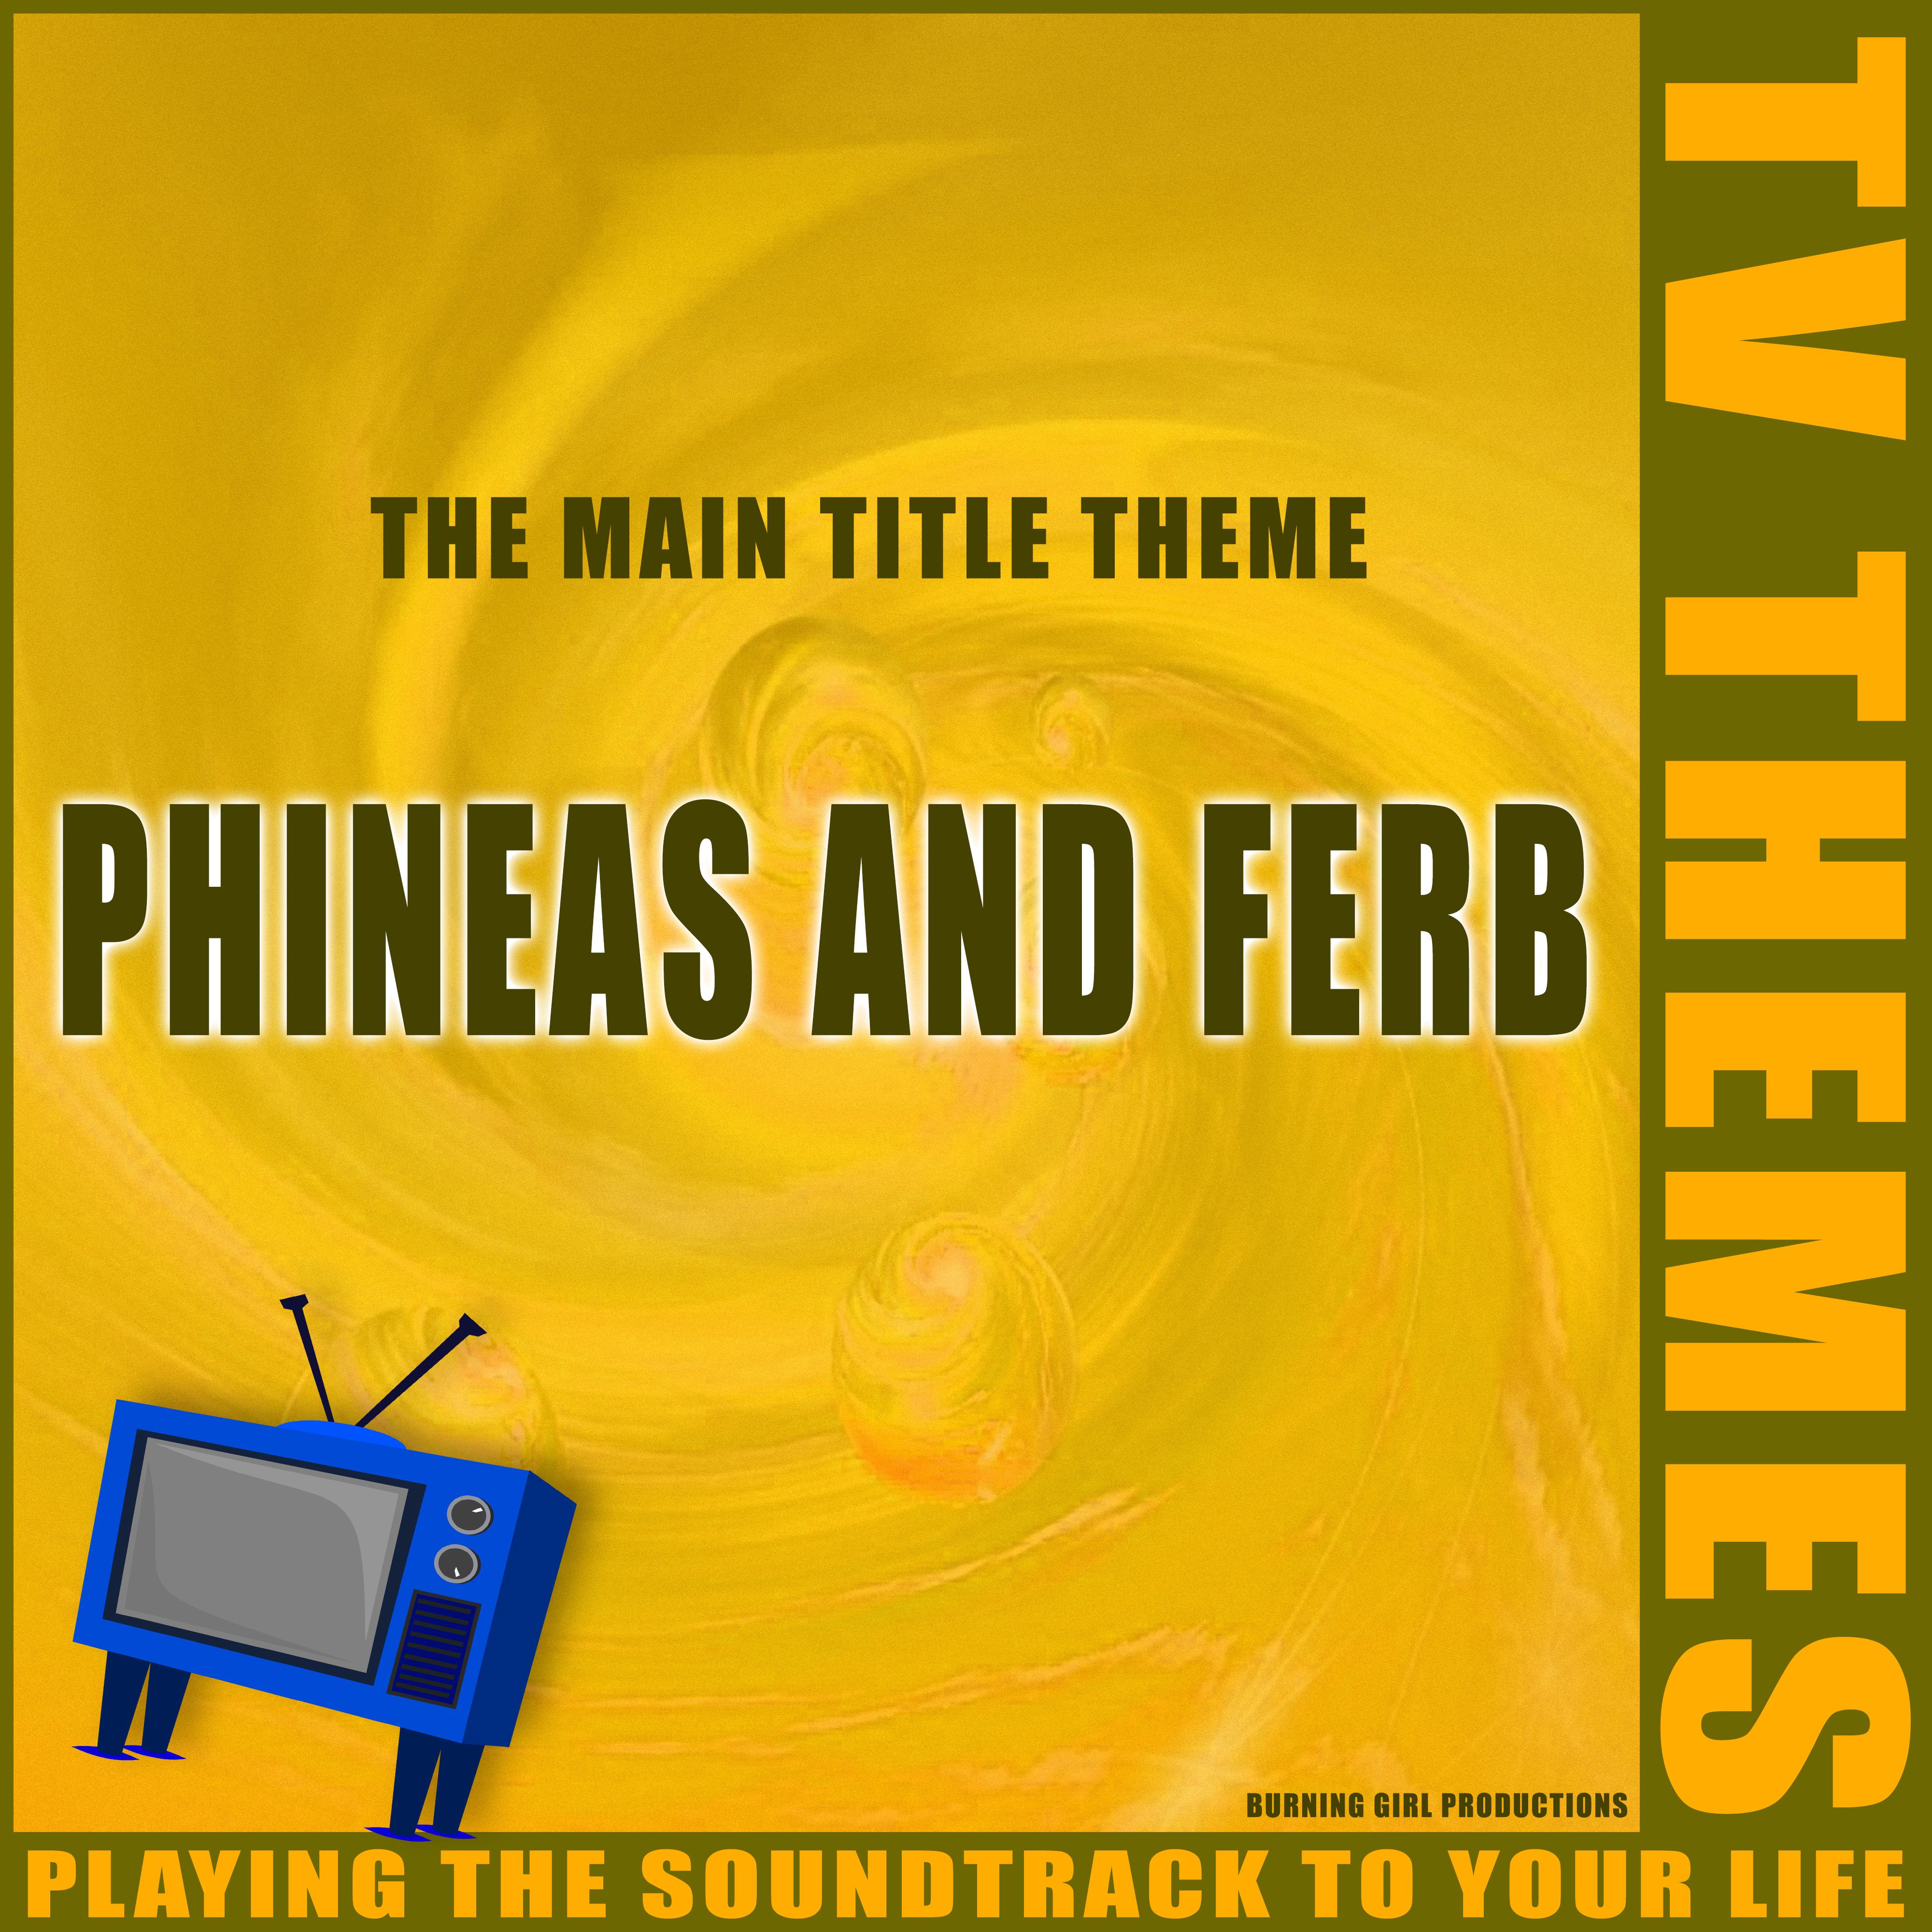 Phineas and Ferb - The Main Title Theme